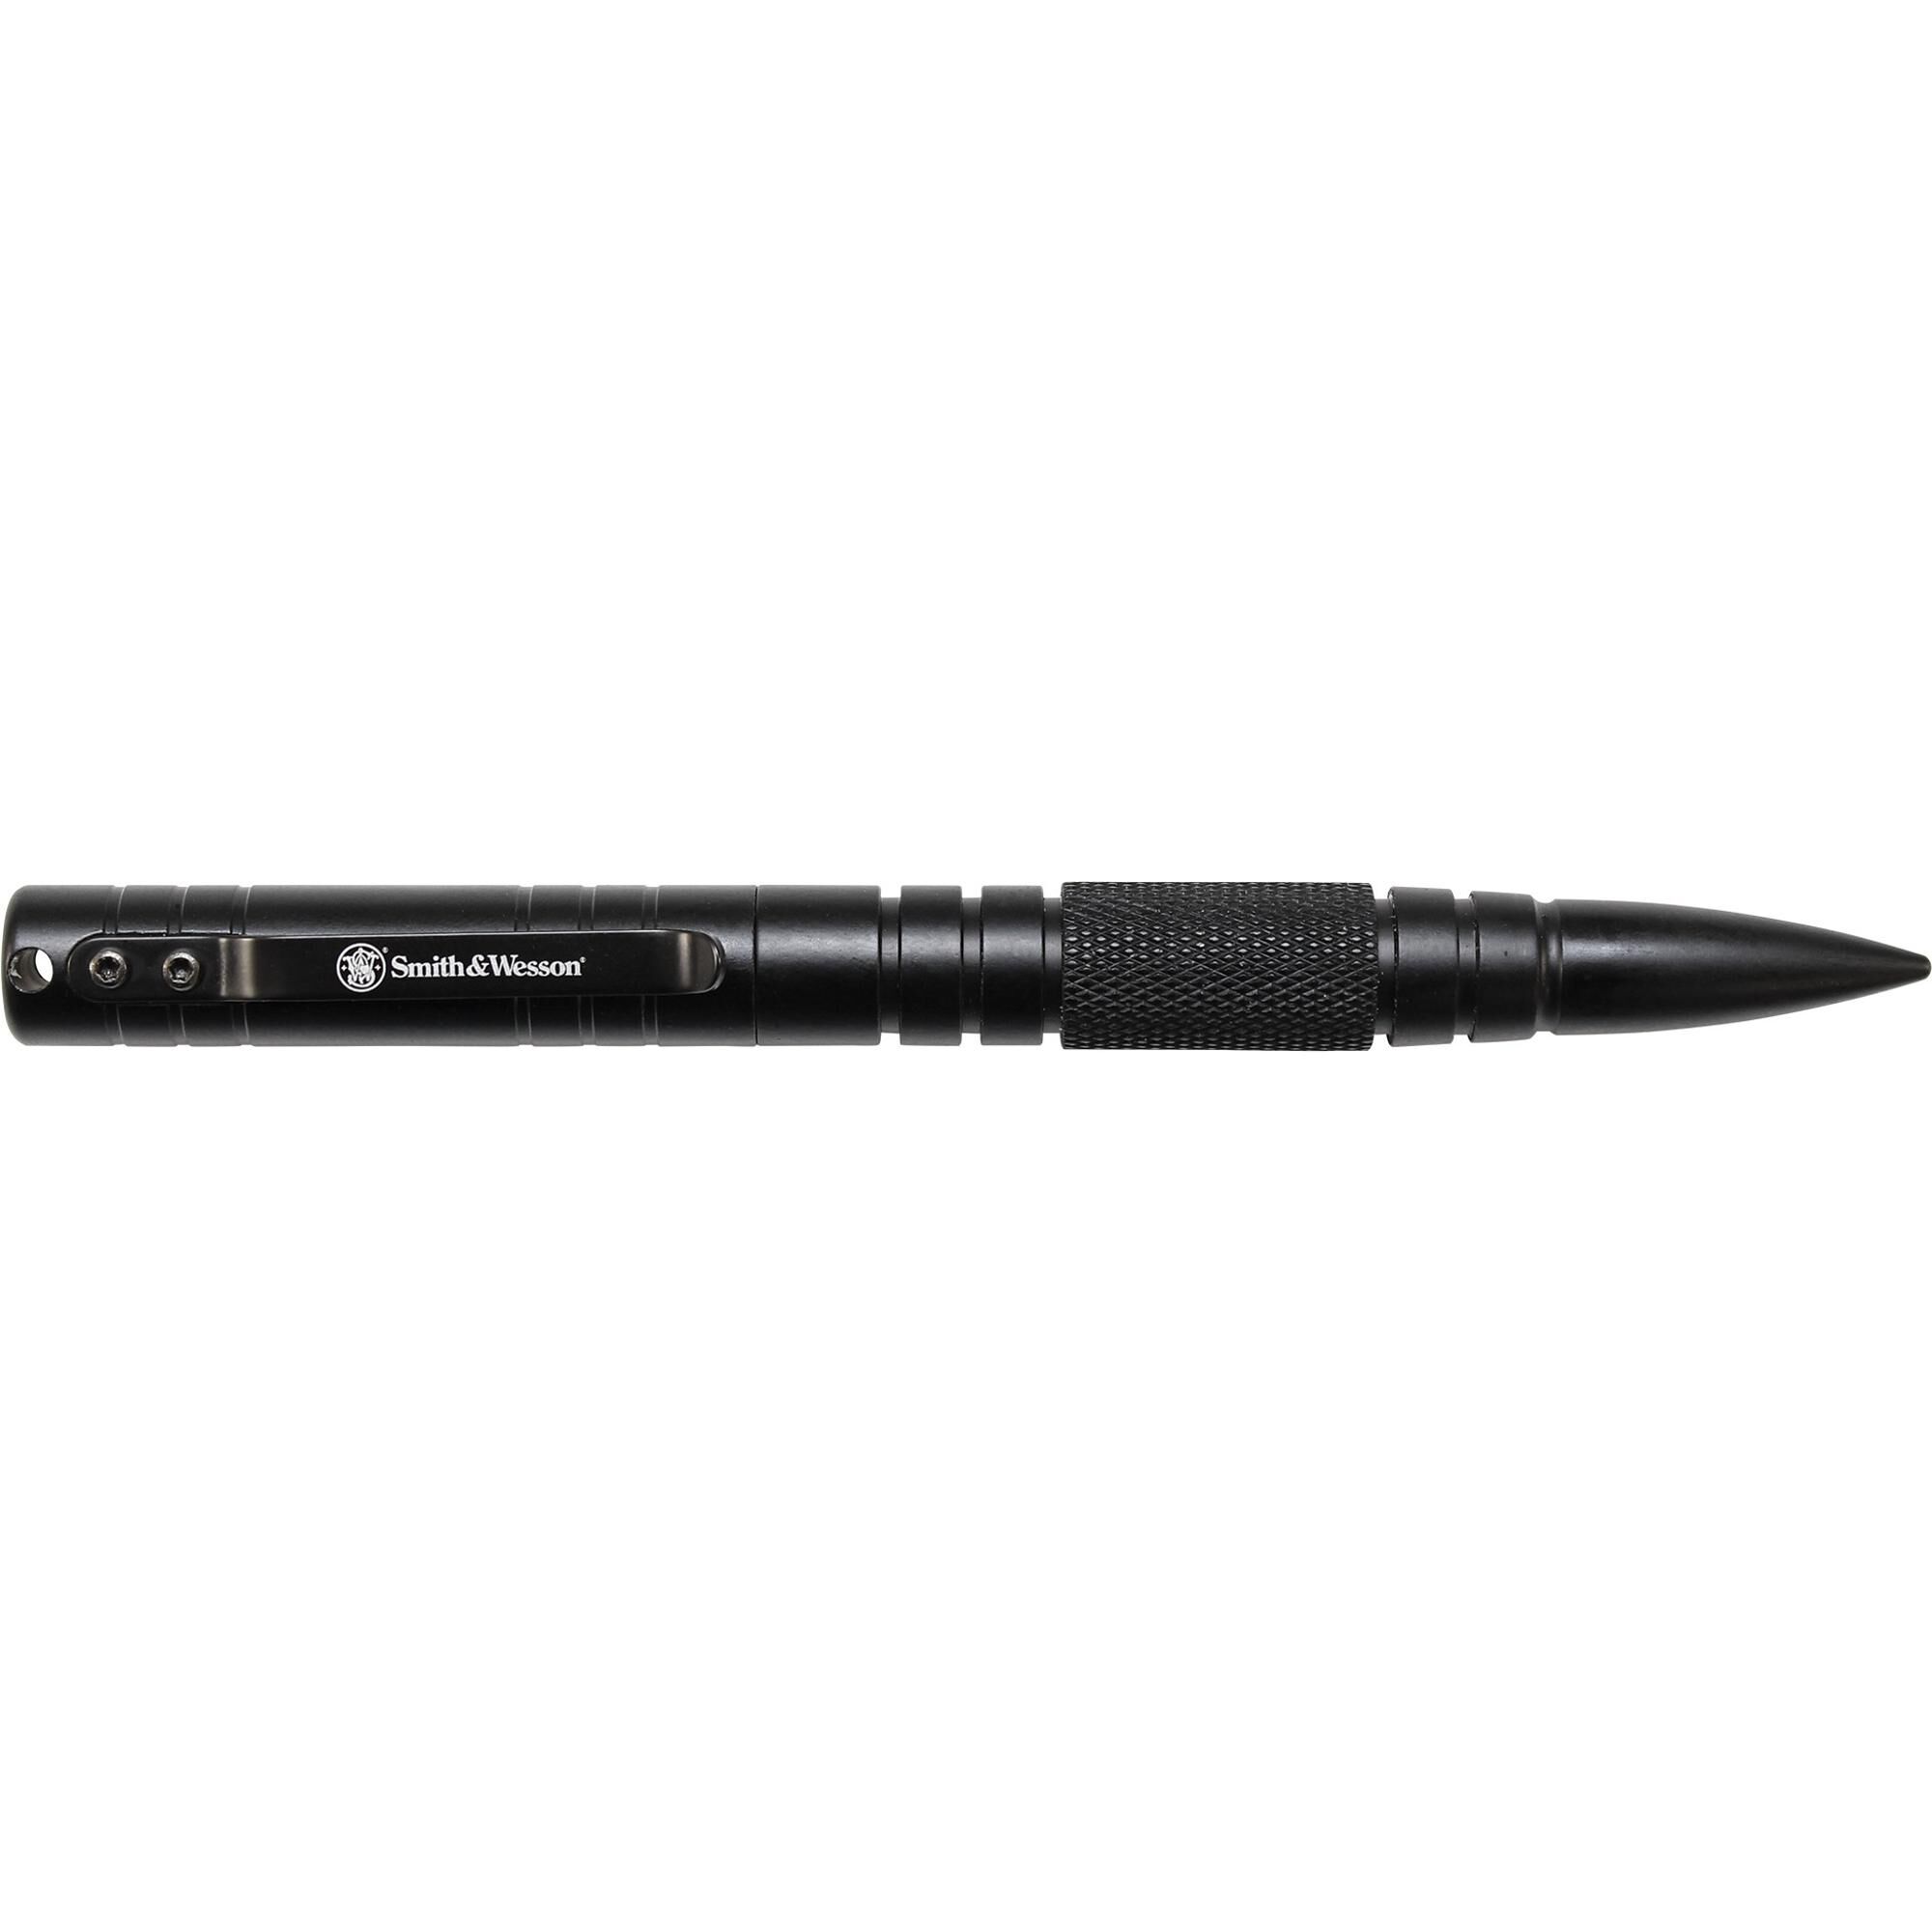 Survival Smith & Wesson M&P 6in Aircraft Aluminum Refillable Tactical Twist Cap Pen with Spring Loaded Window Punch for Outdoor Camping and EDC 